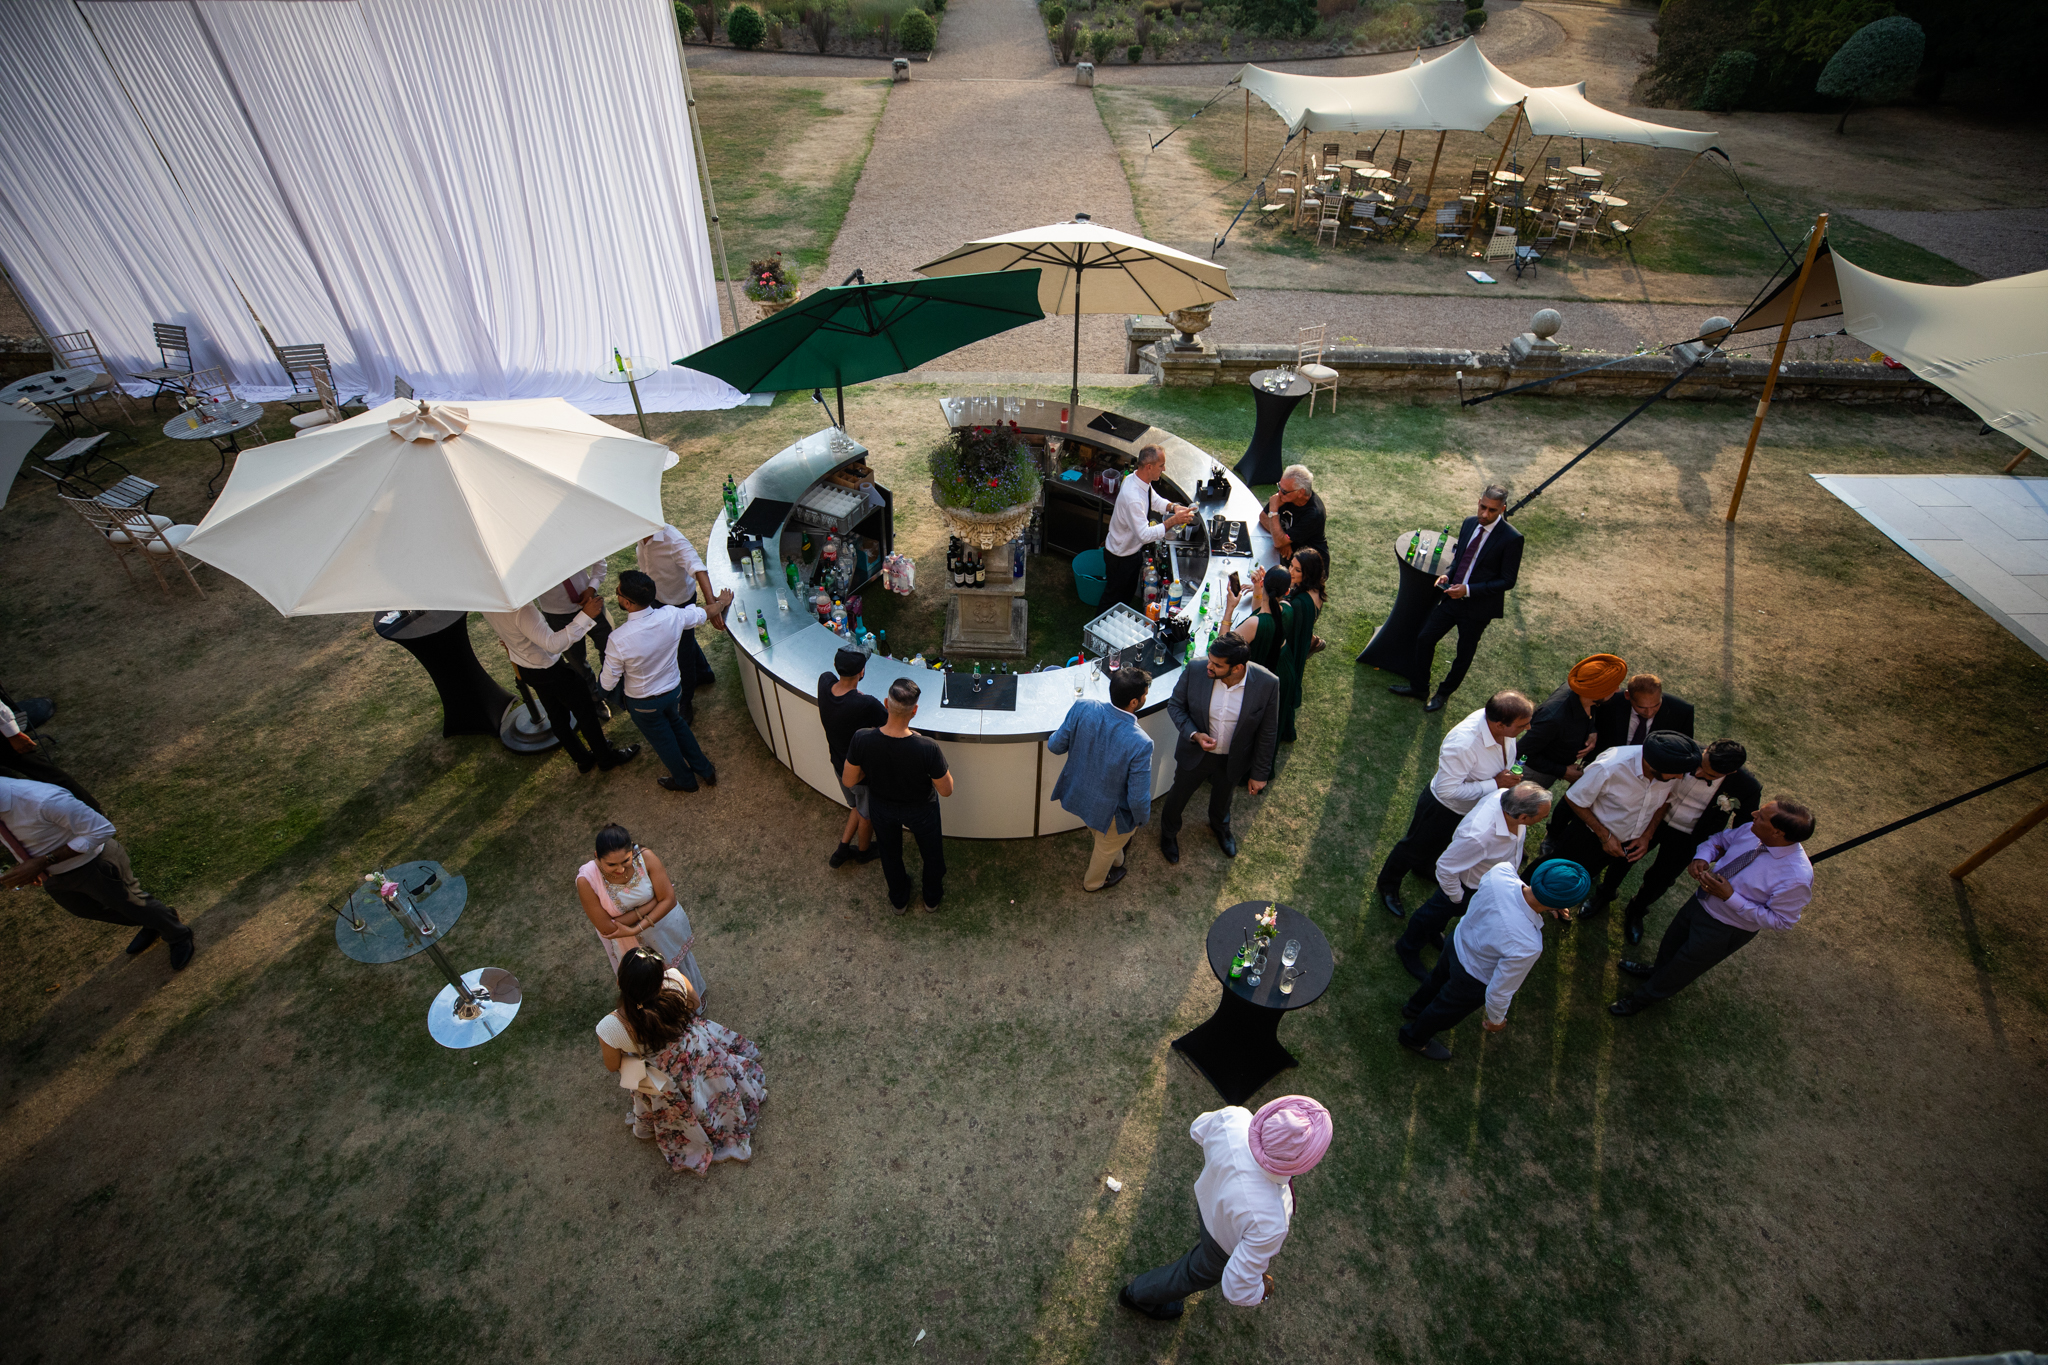 Ariel shot of guestrs at a wedding celebrating as they drink from the outside bar shaped in a circular design